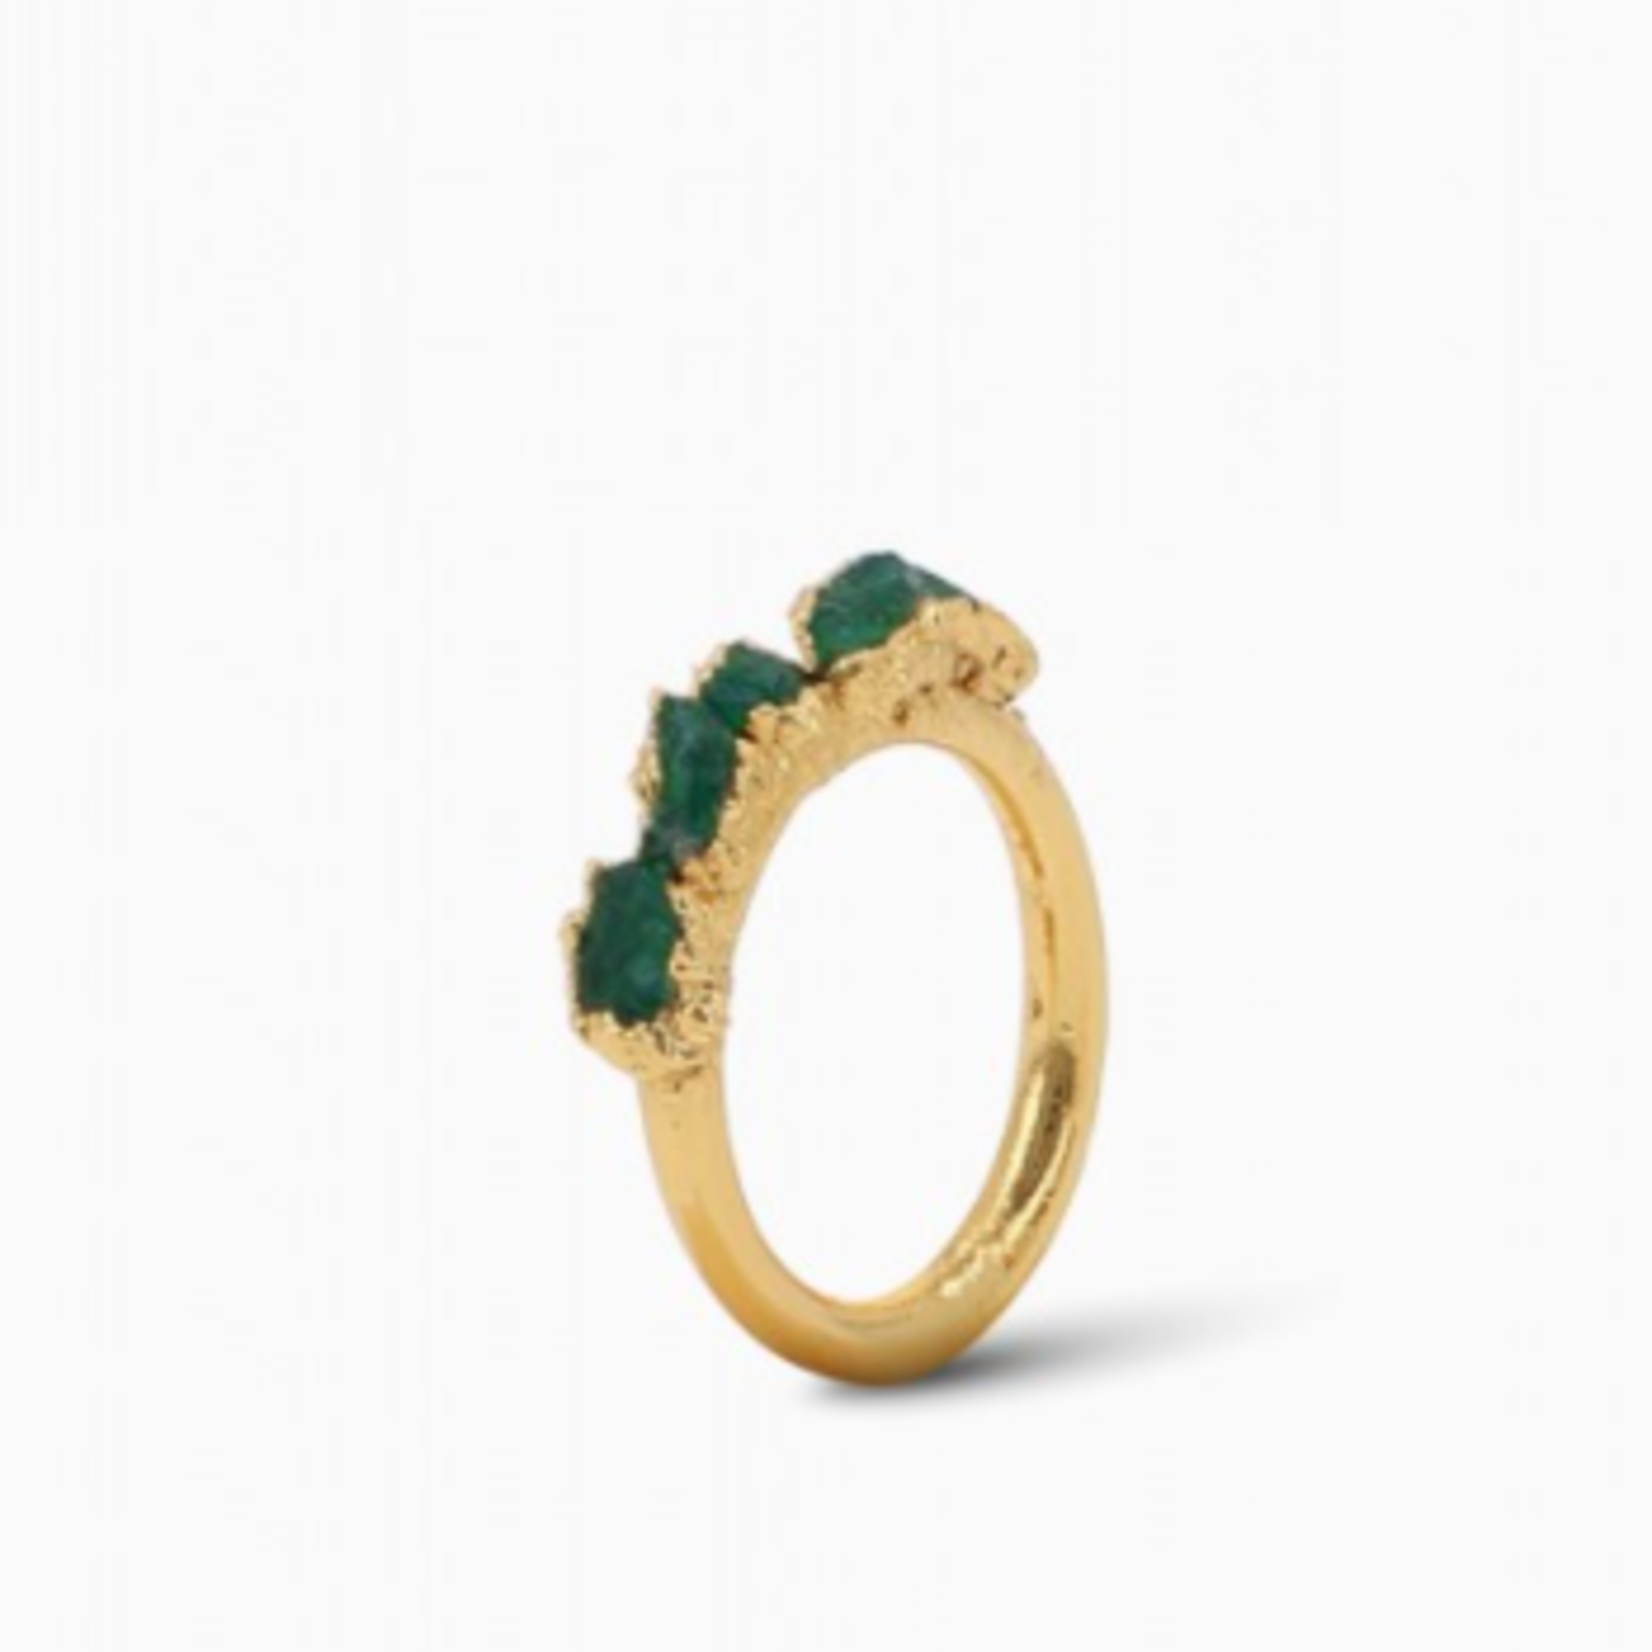 Raw Emerald Band Ring - 24K Gold Over Brass